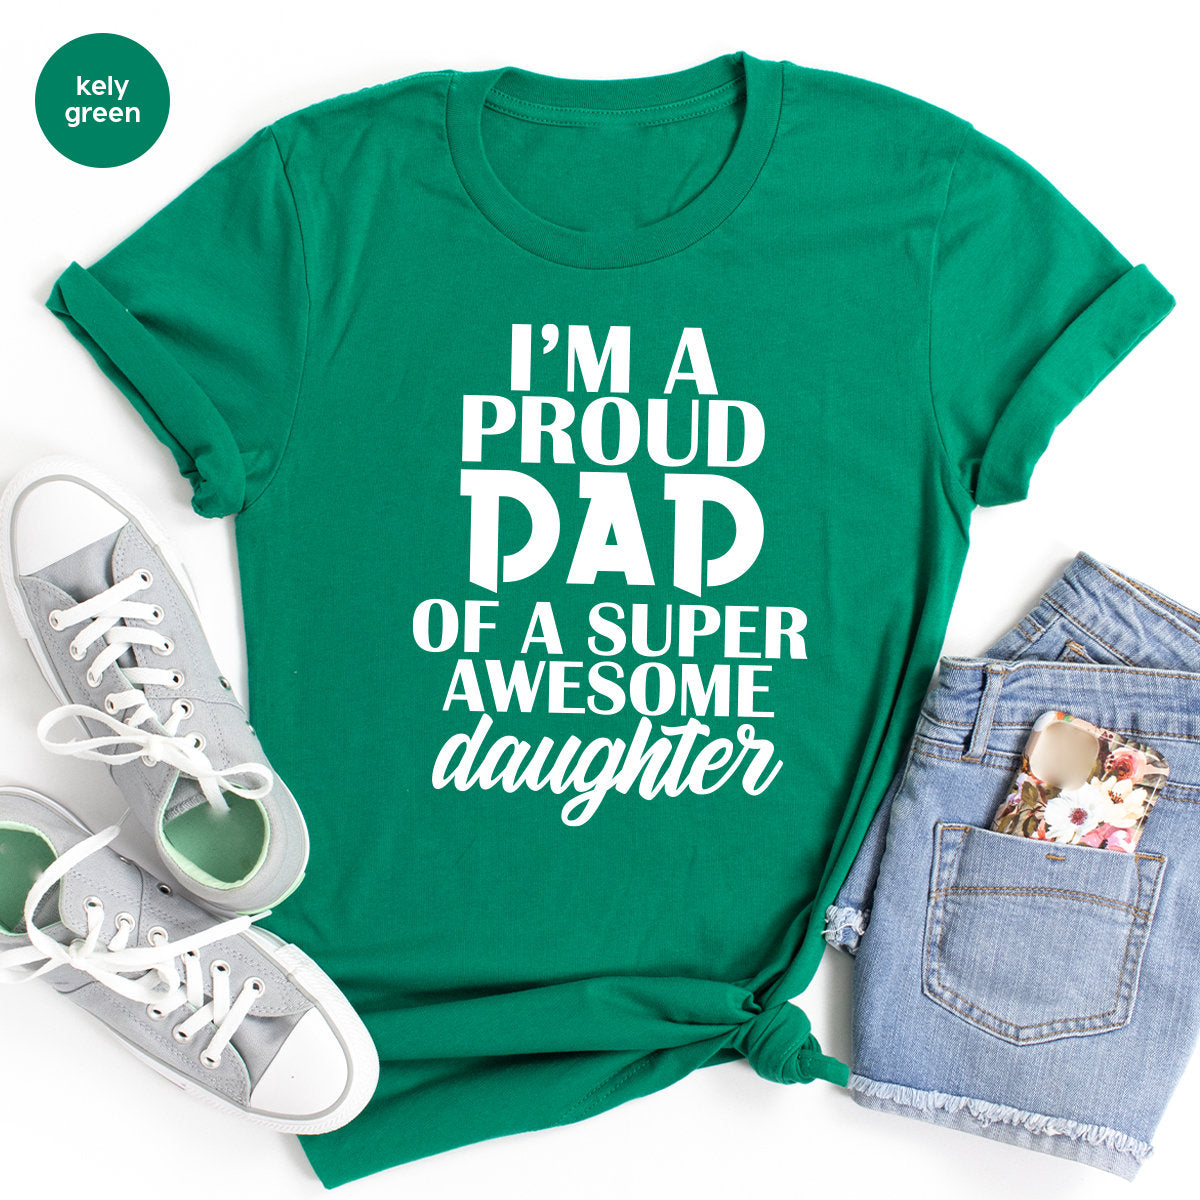 Dad T Shirt, Gift For Dad, Father's Day Shirt, Best Father Shirt, I'm Proud Dad Of A Super Awesome Daughter Tee, Daddy TShirt, Dad Gift - Fastdeliverytees.com